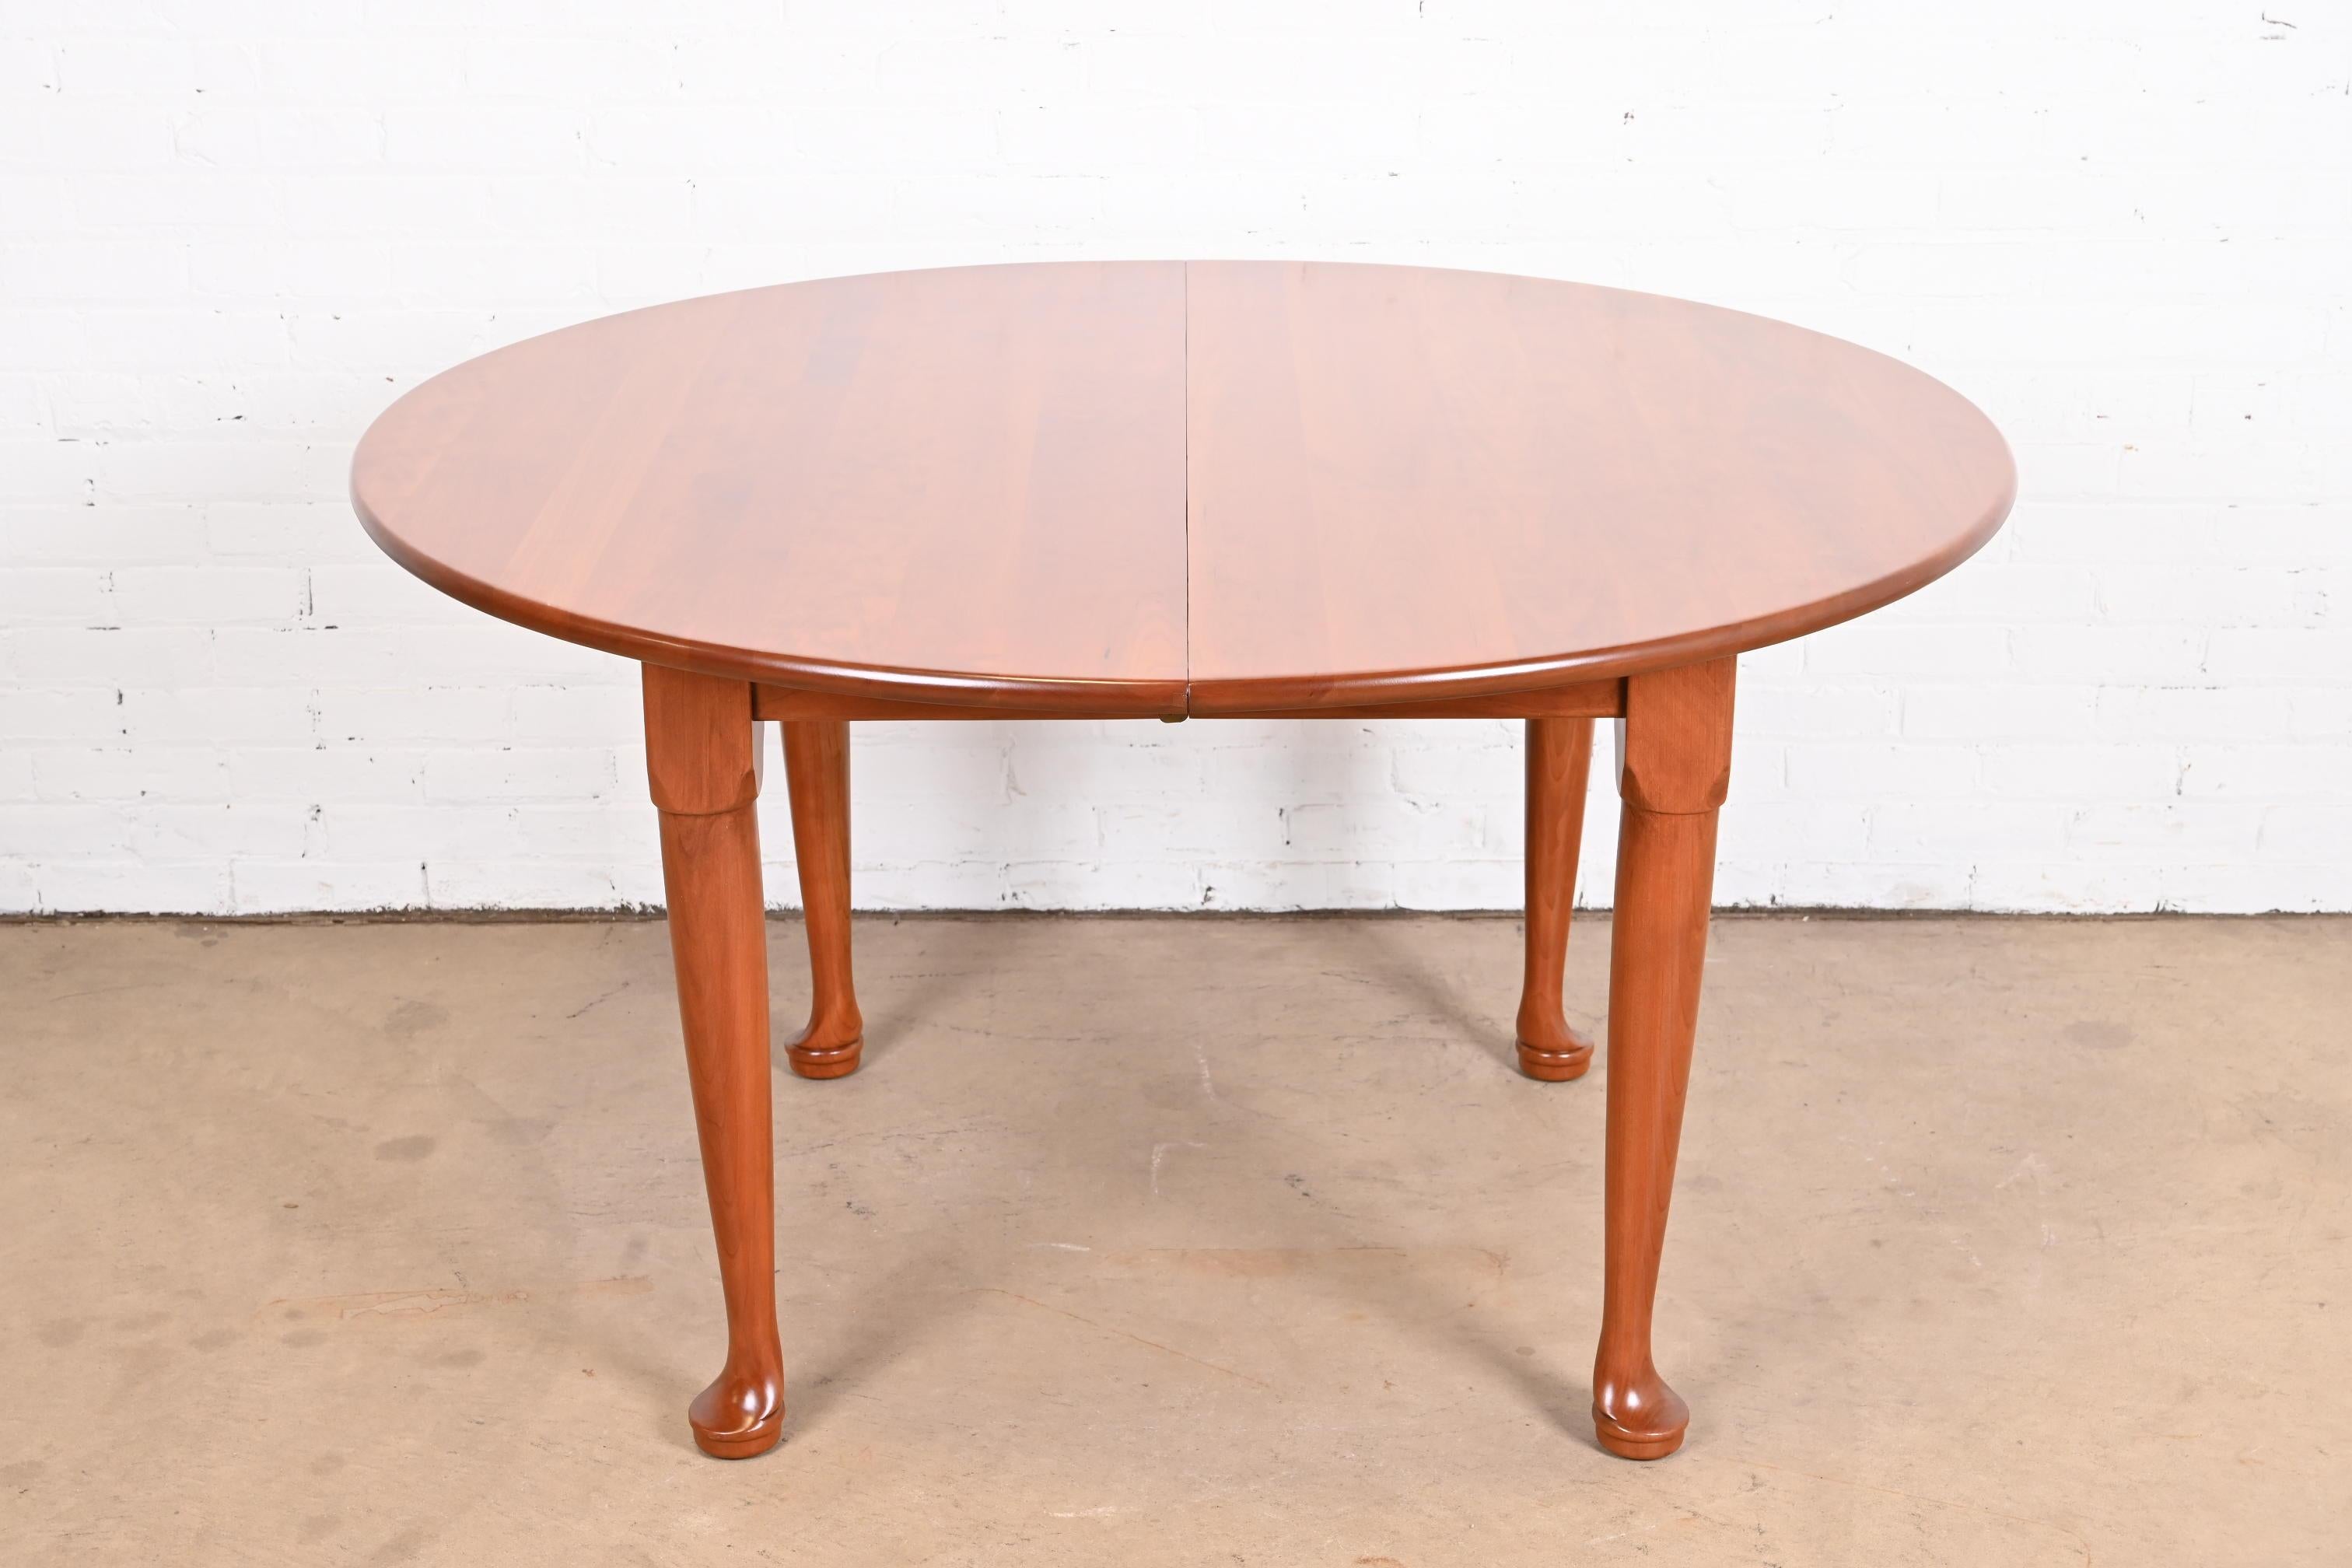 Stickley American Colonial Cherry Wood Extension Dining Table, Newly Refinished For Sale 2